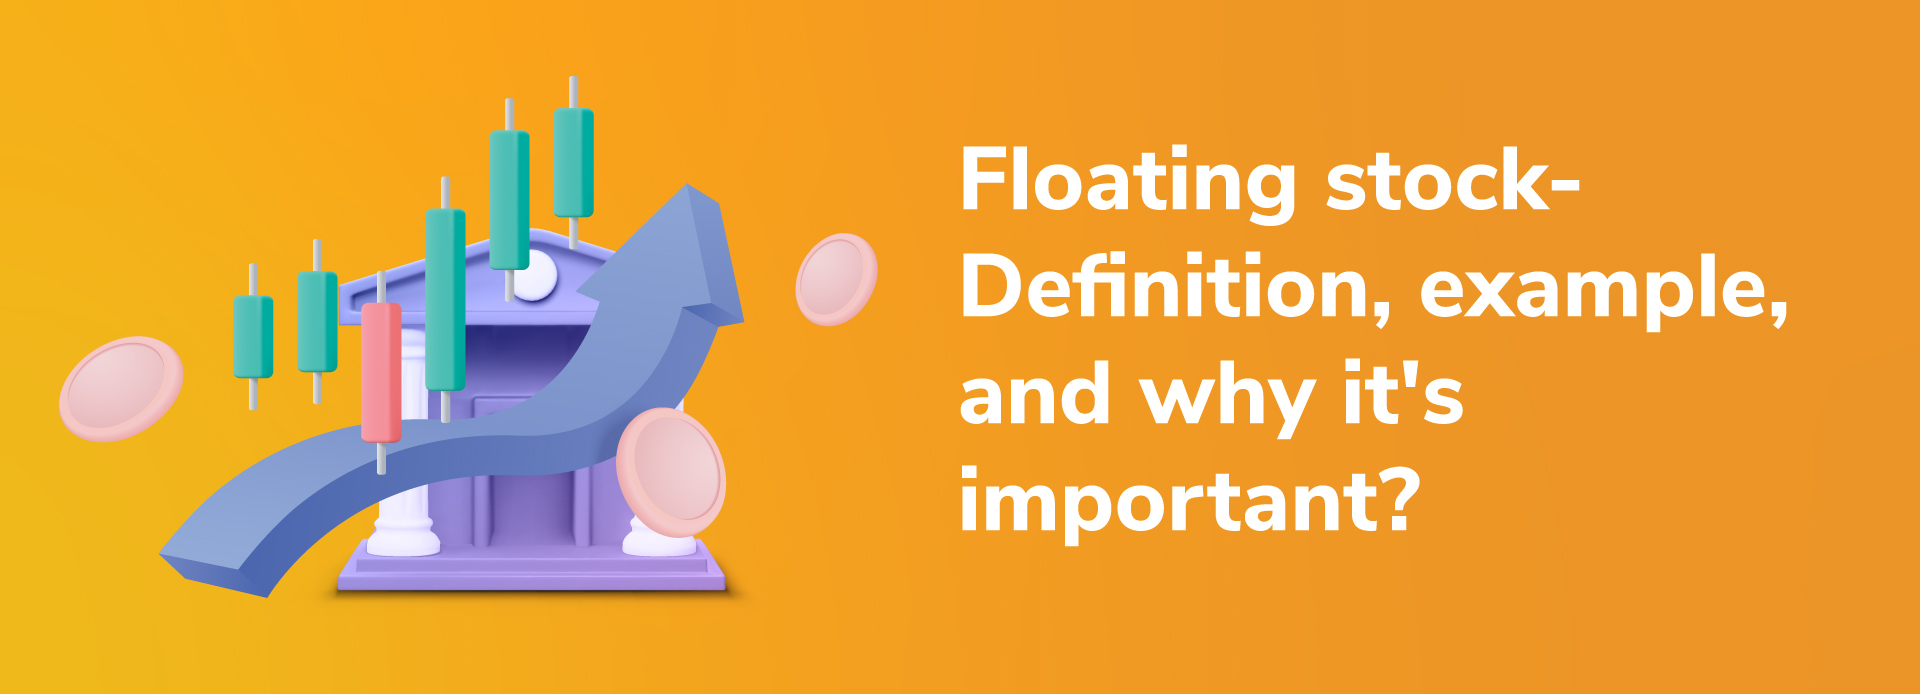 Floating stock- Definition, example, and why it's important 